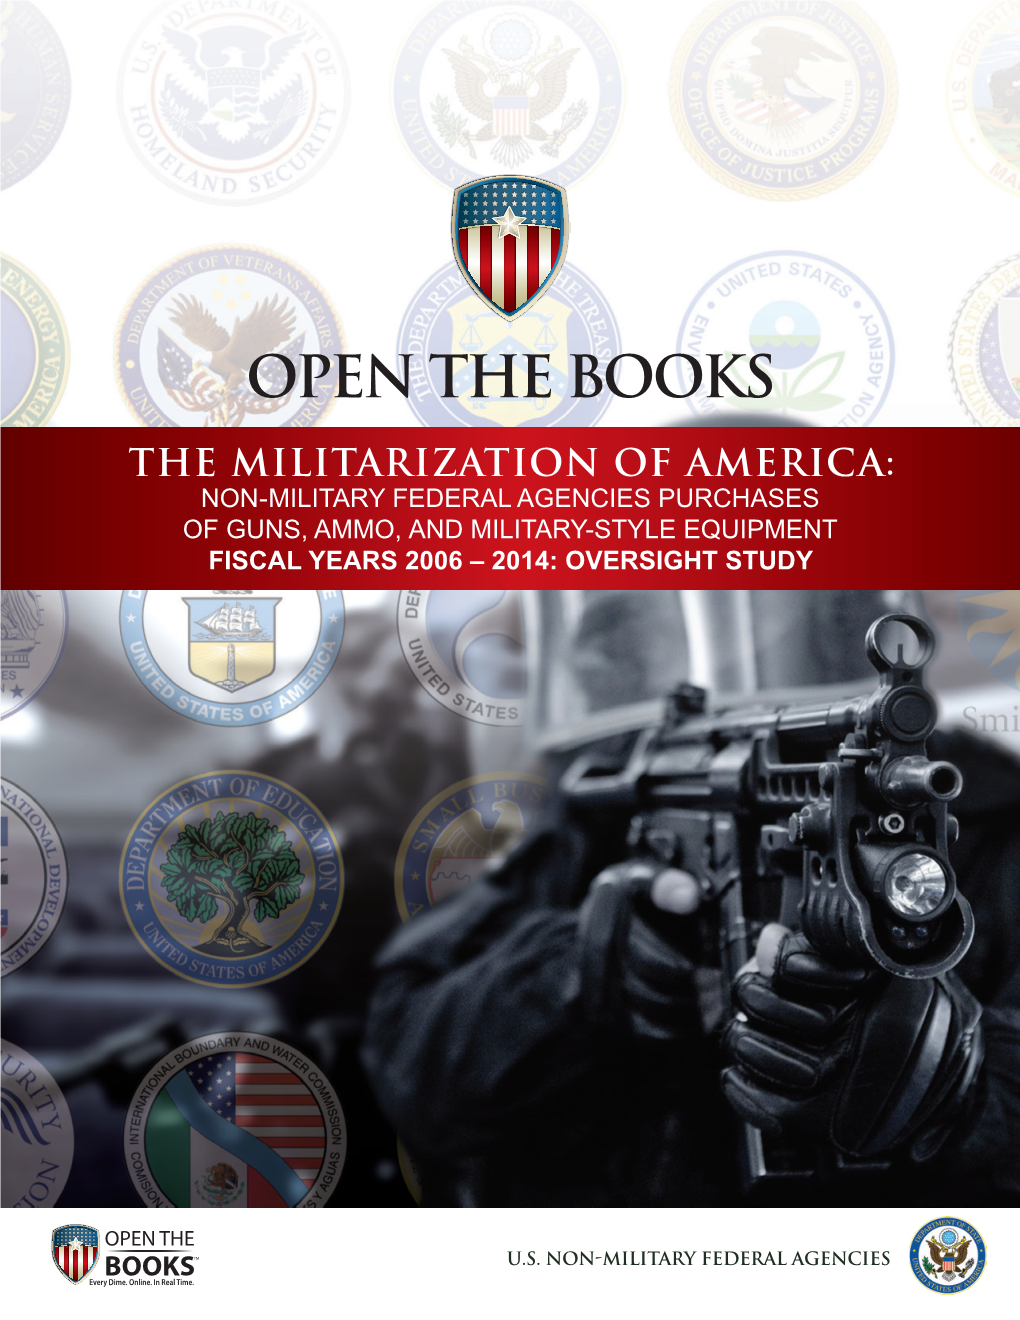 The Militarization of America: Non-Military Federal Agencies Purchases of Guns, Ammo, and Military-Style Equipment Fiscal Years 2006 – 2014: Oversight Study